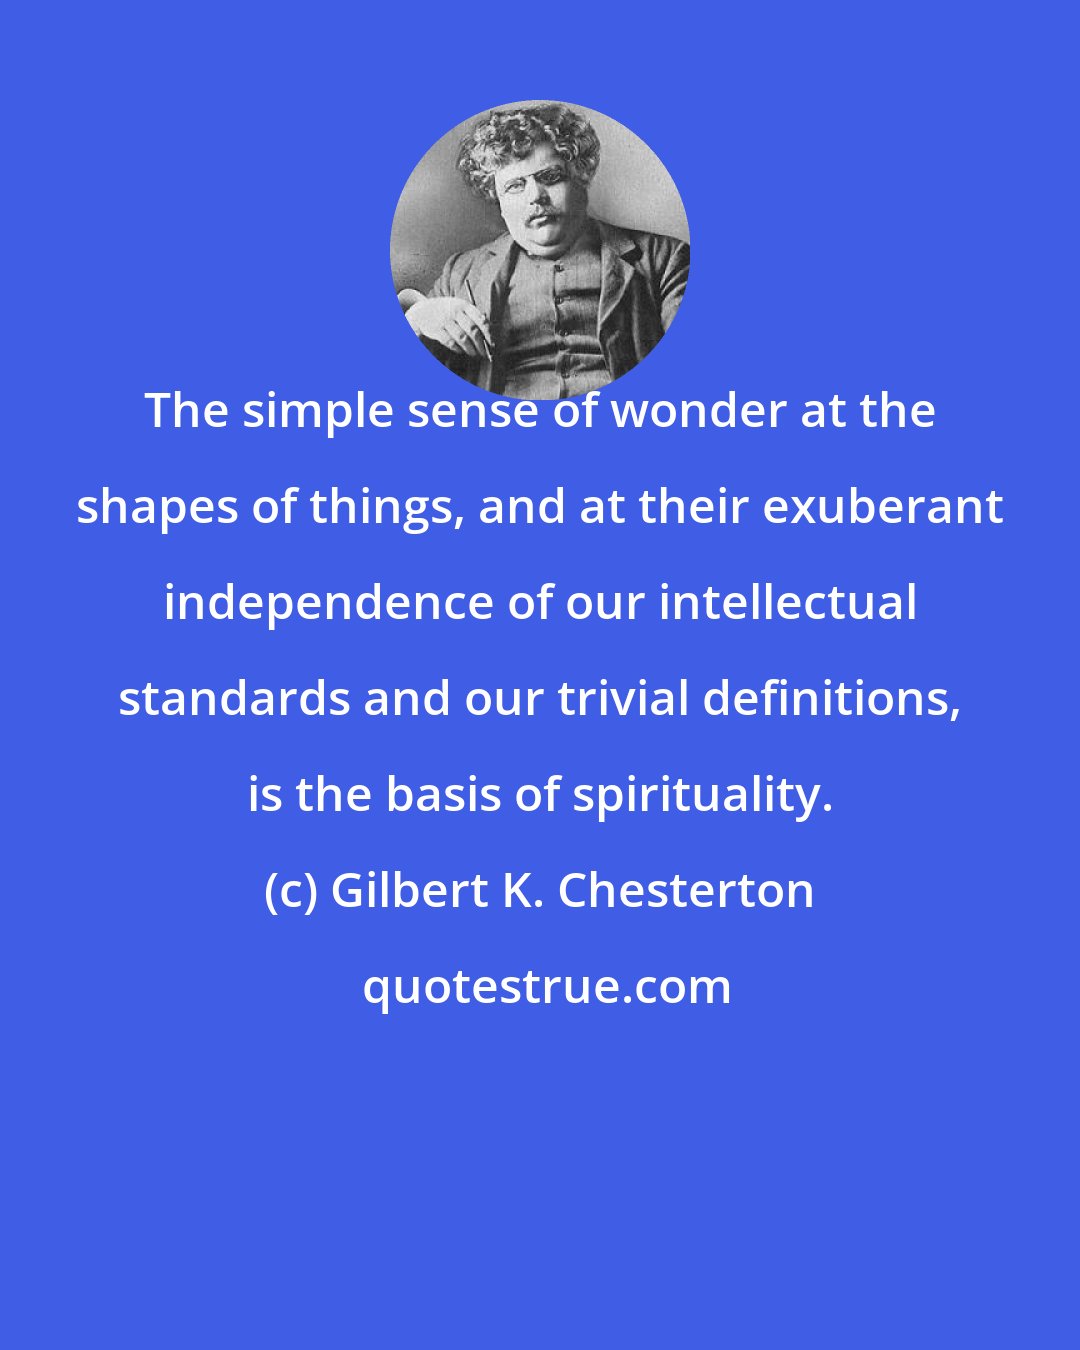 Gilbert K. Chesterton: The simple sense of wonder at the shapes of things, and at their exuberant independence of our intellectual standards and our trivial definitions, is the basis of spirituality.